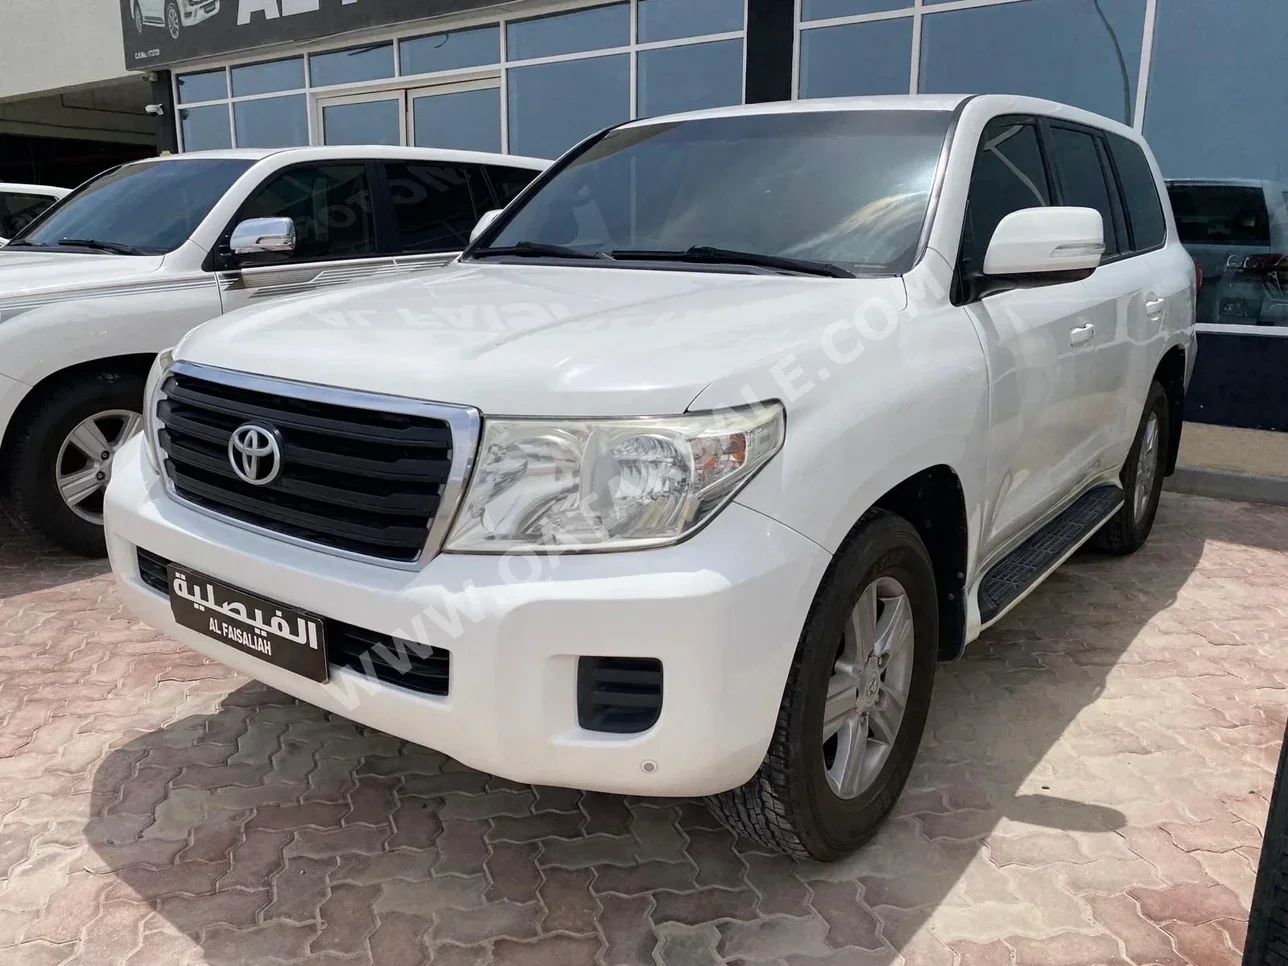 Toyota  Land Cruiser  G  2015  Automatic  280,000 Km  6 Cylinder  Four Wheel Drive (4WD)  SUV  White